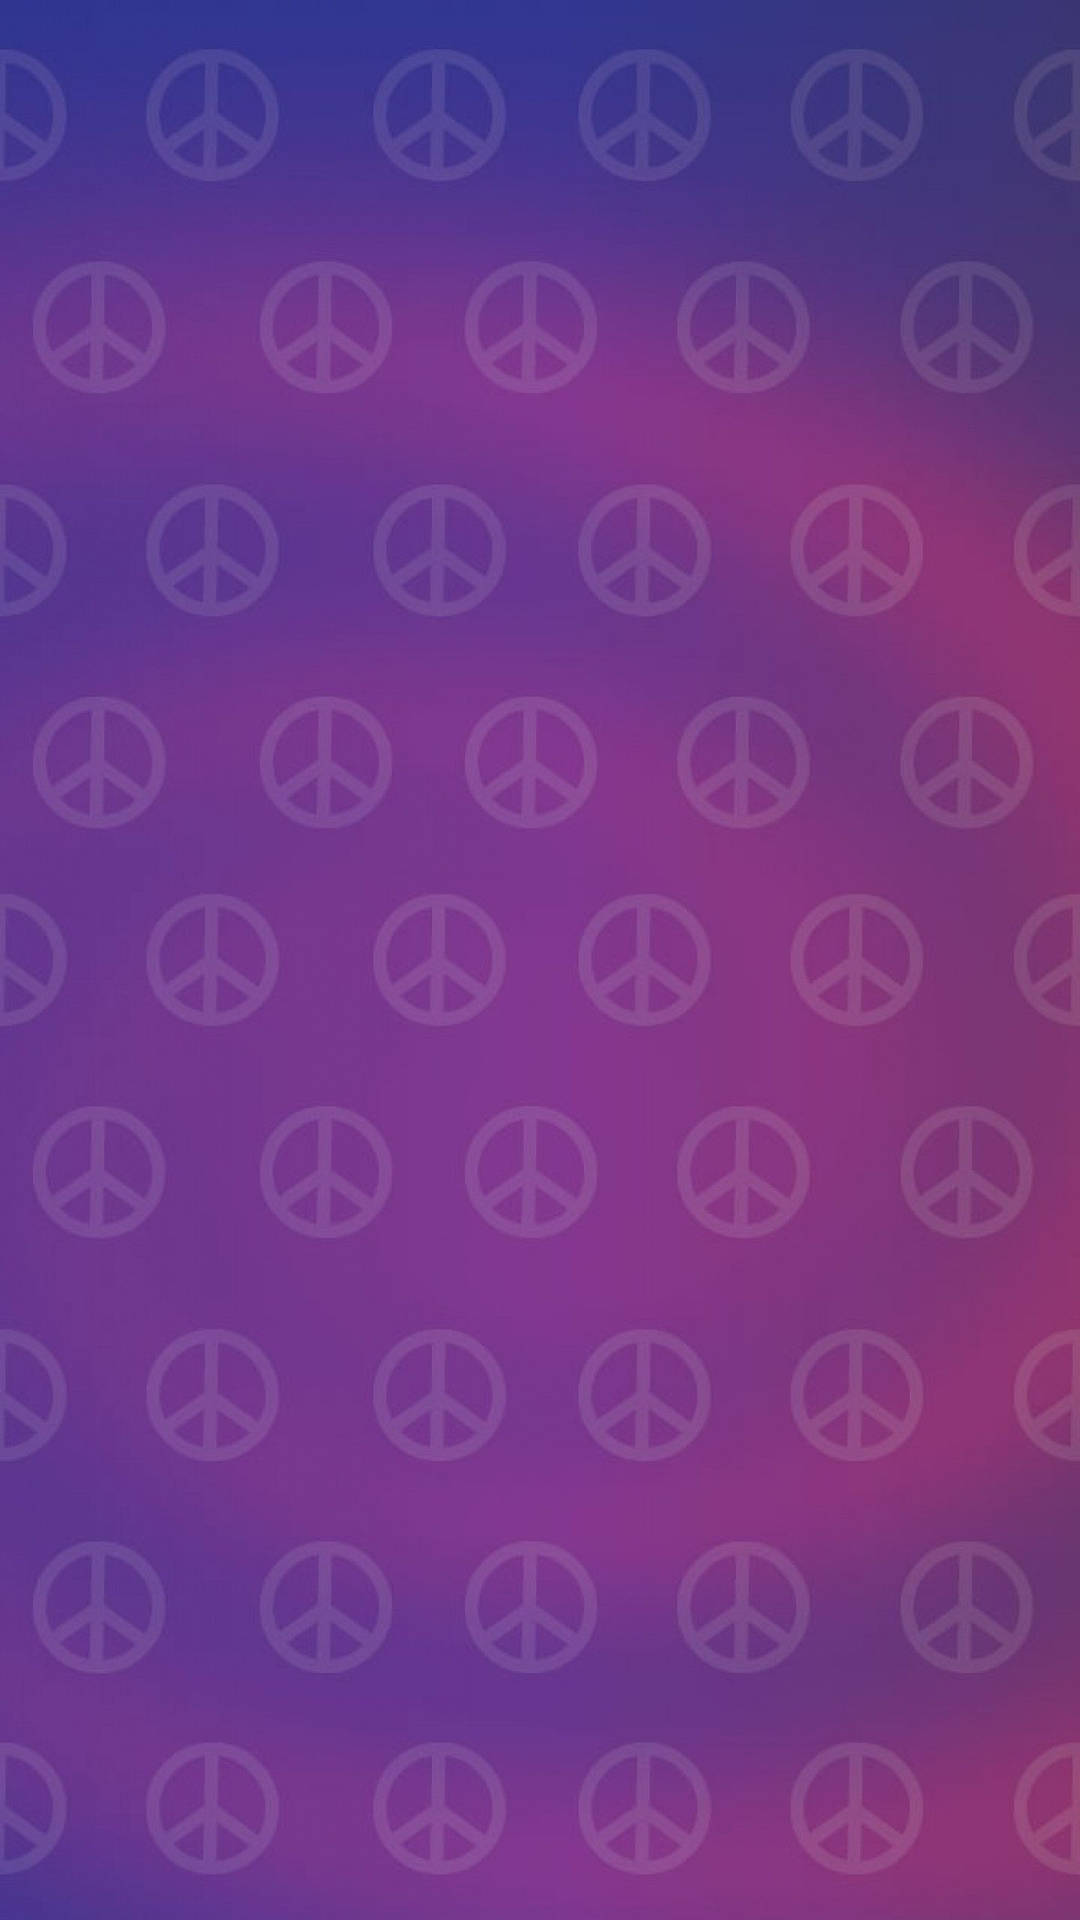 Hippie Iconic Peace Sign Background